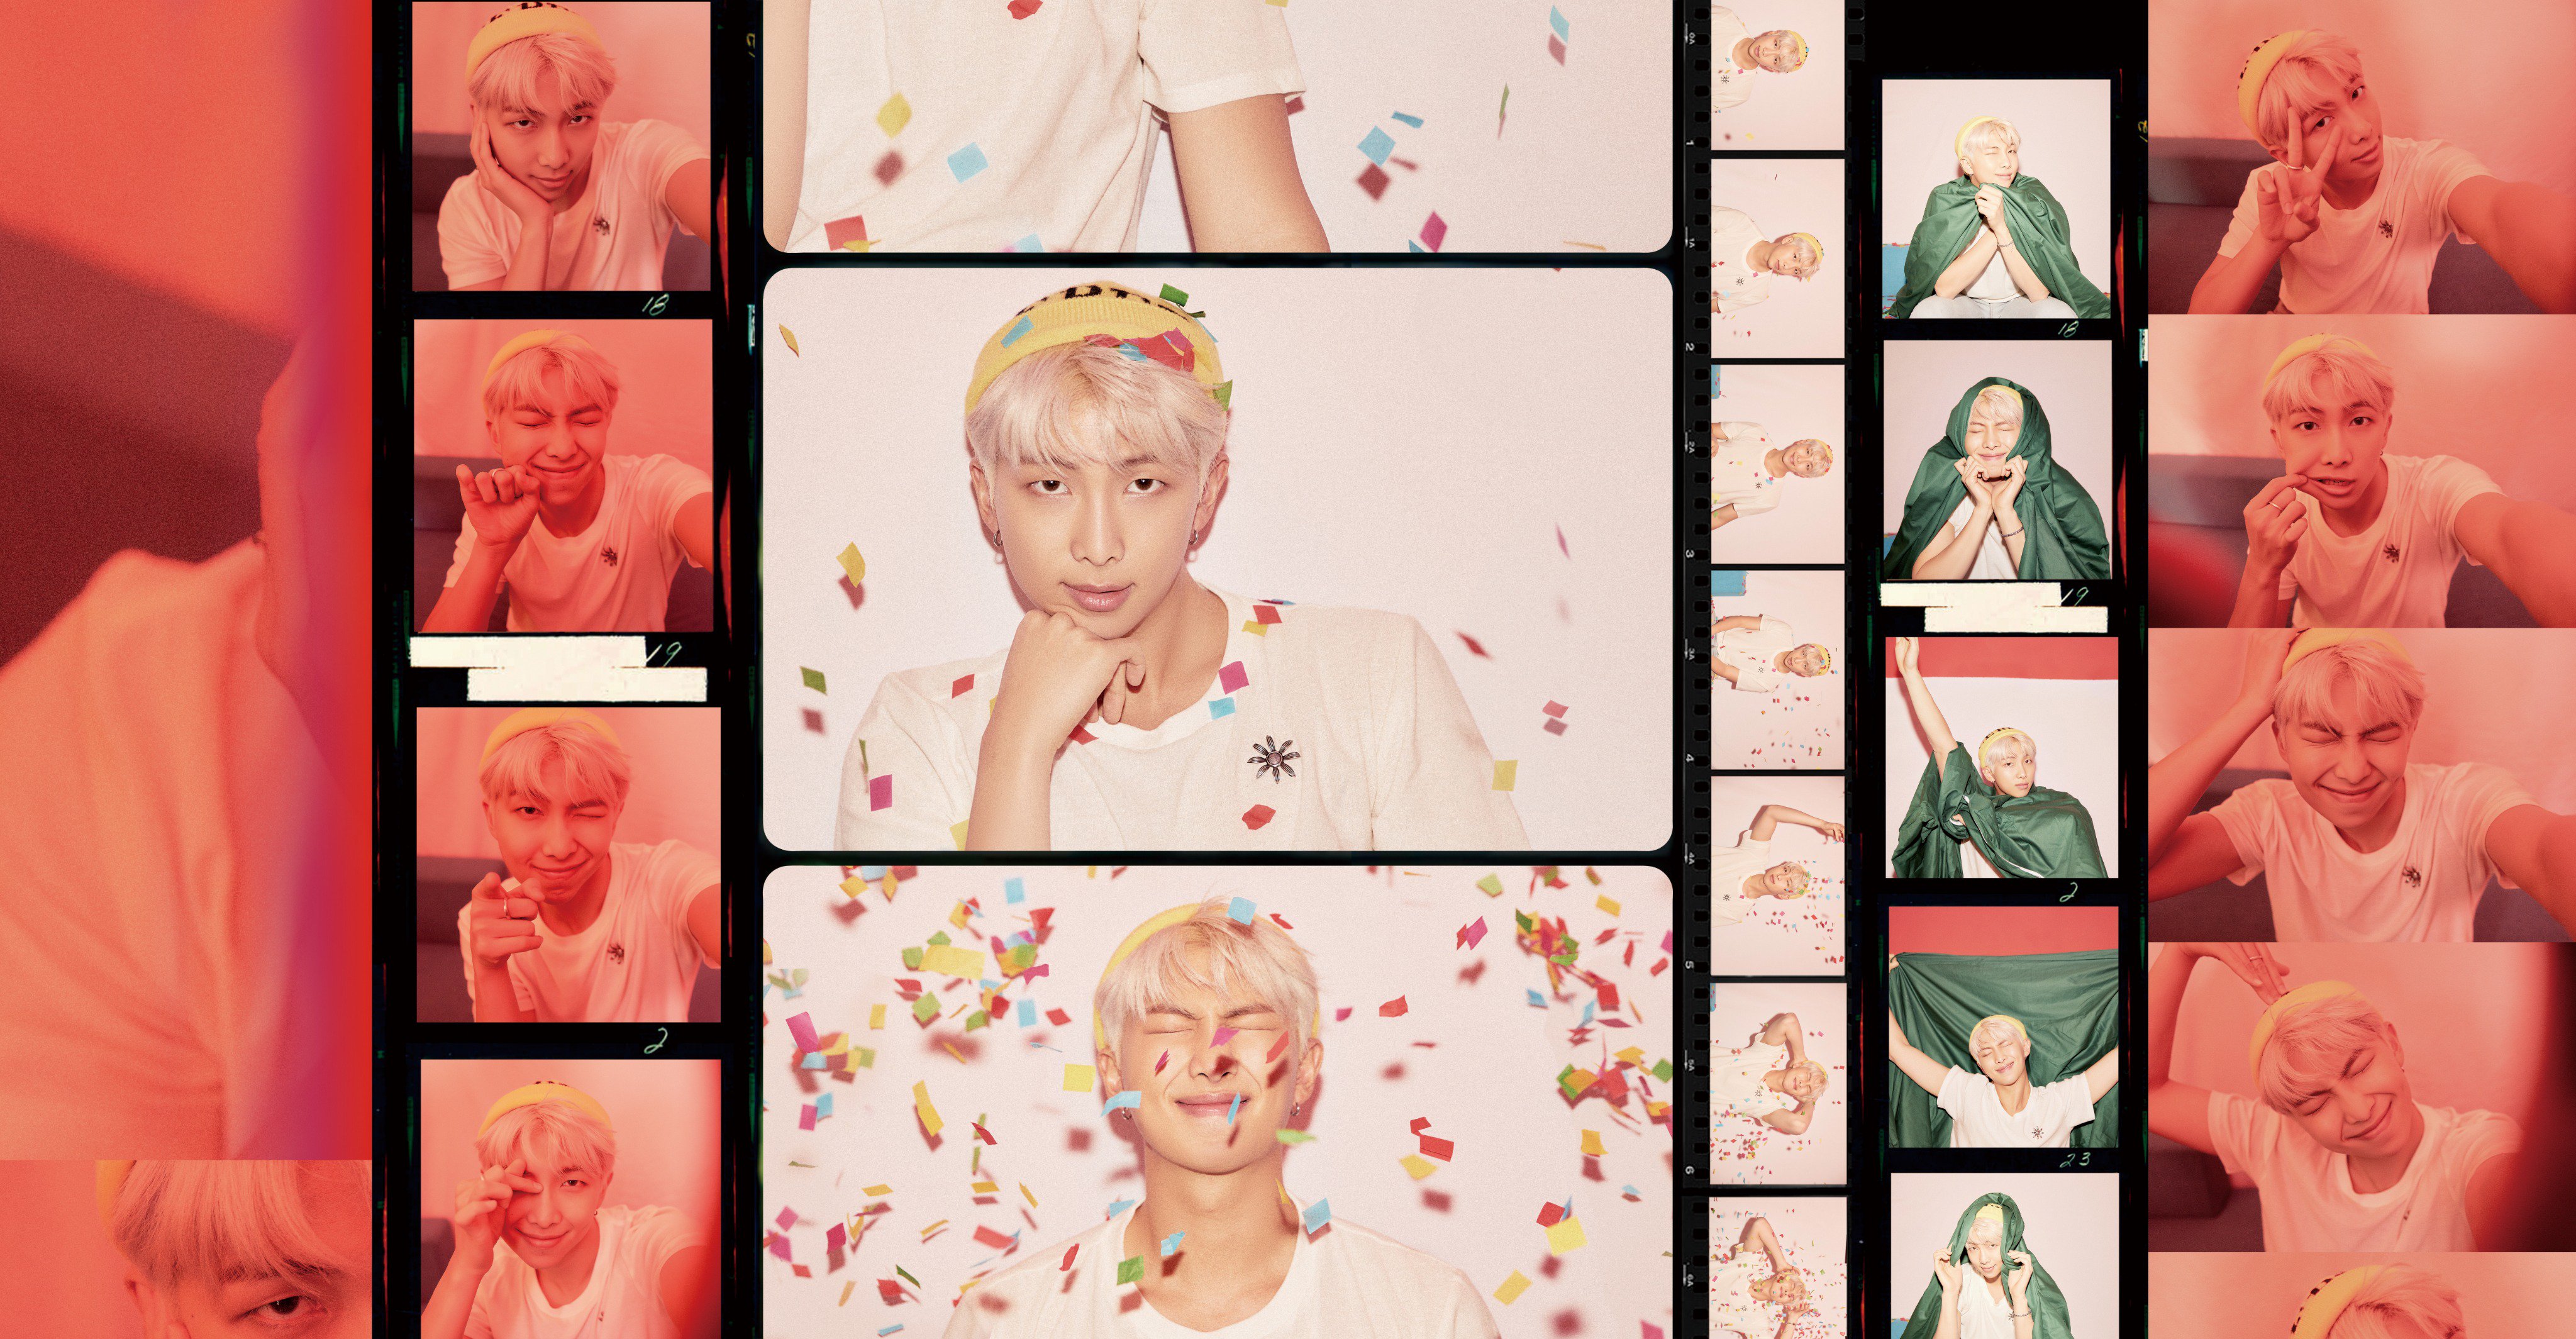 Bts Rm Map Of The Soul Persona - Bts Map Of The Soul Persona Concept , HD Wallpaper & Backgrounds